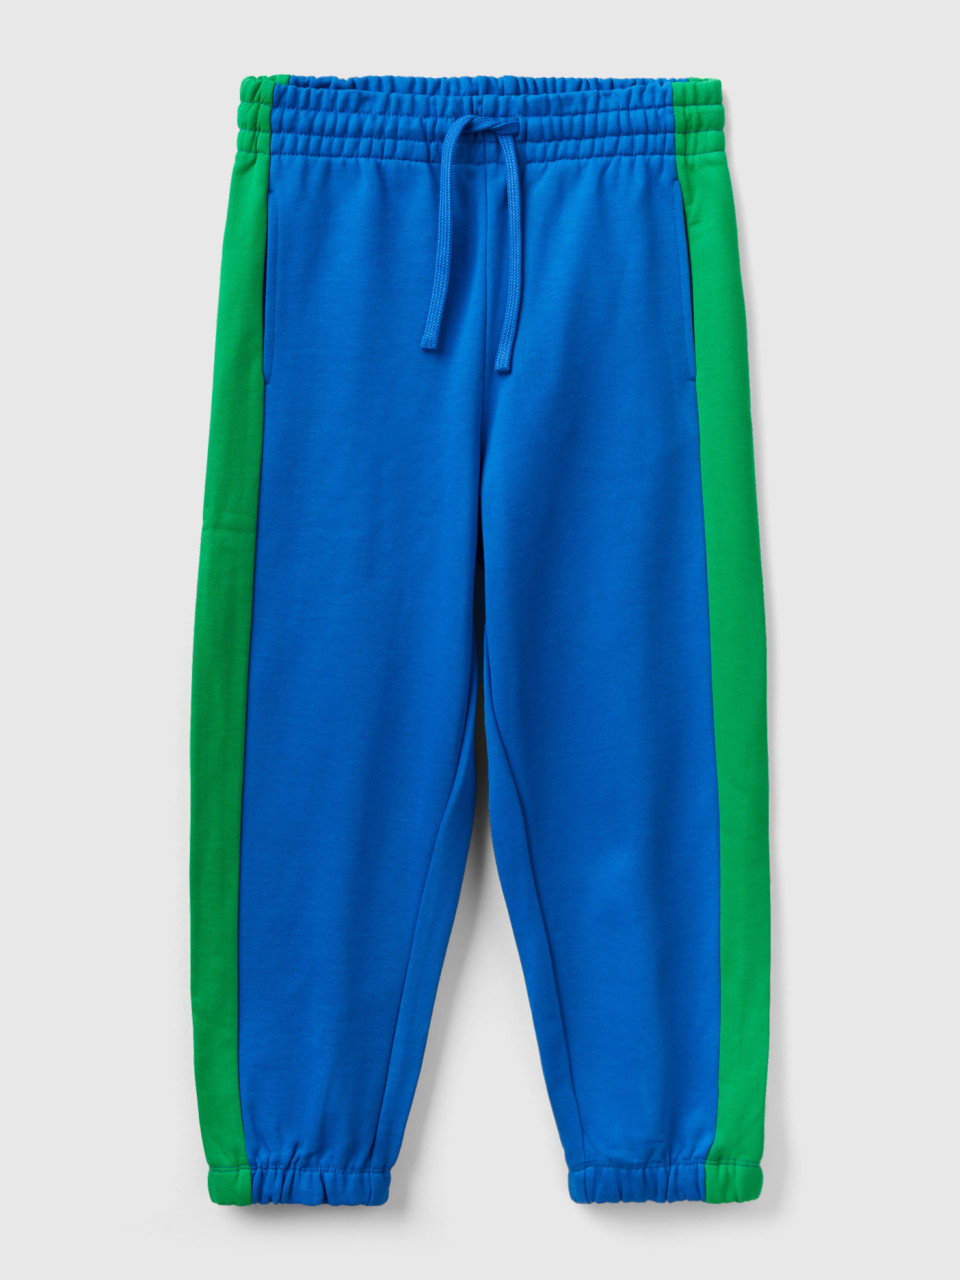 Benetton, Balloon Fit Joggers With Side Bands, Bright Blue, Kids